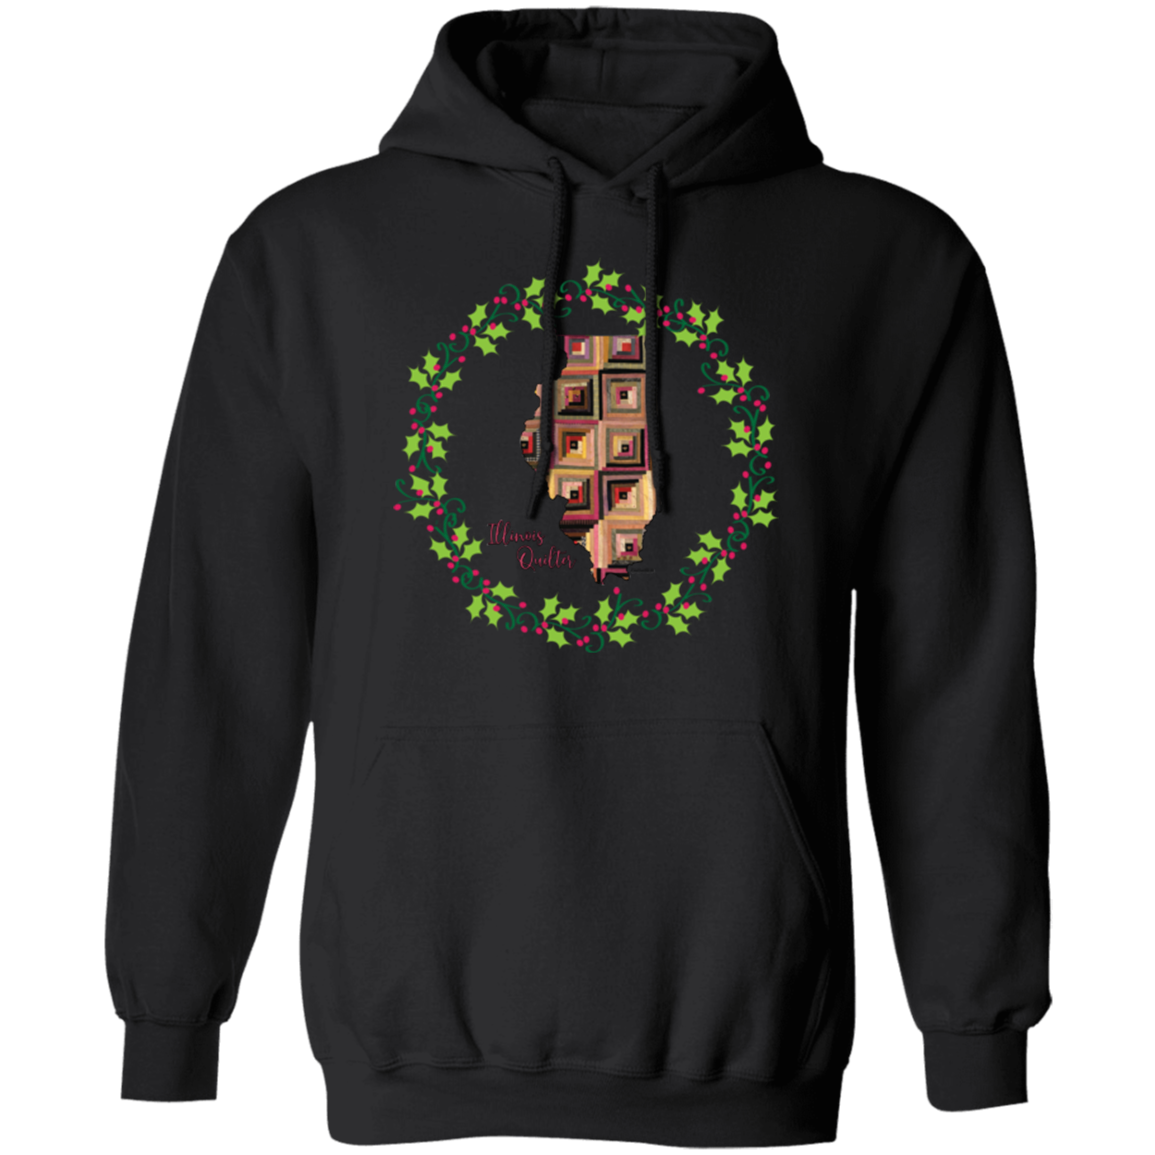 Illinois Quilter Christmas Pullover Hoodie